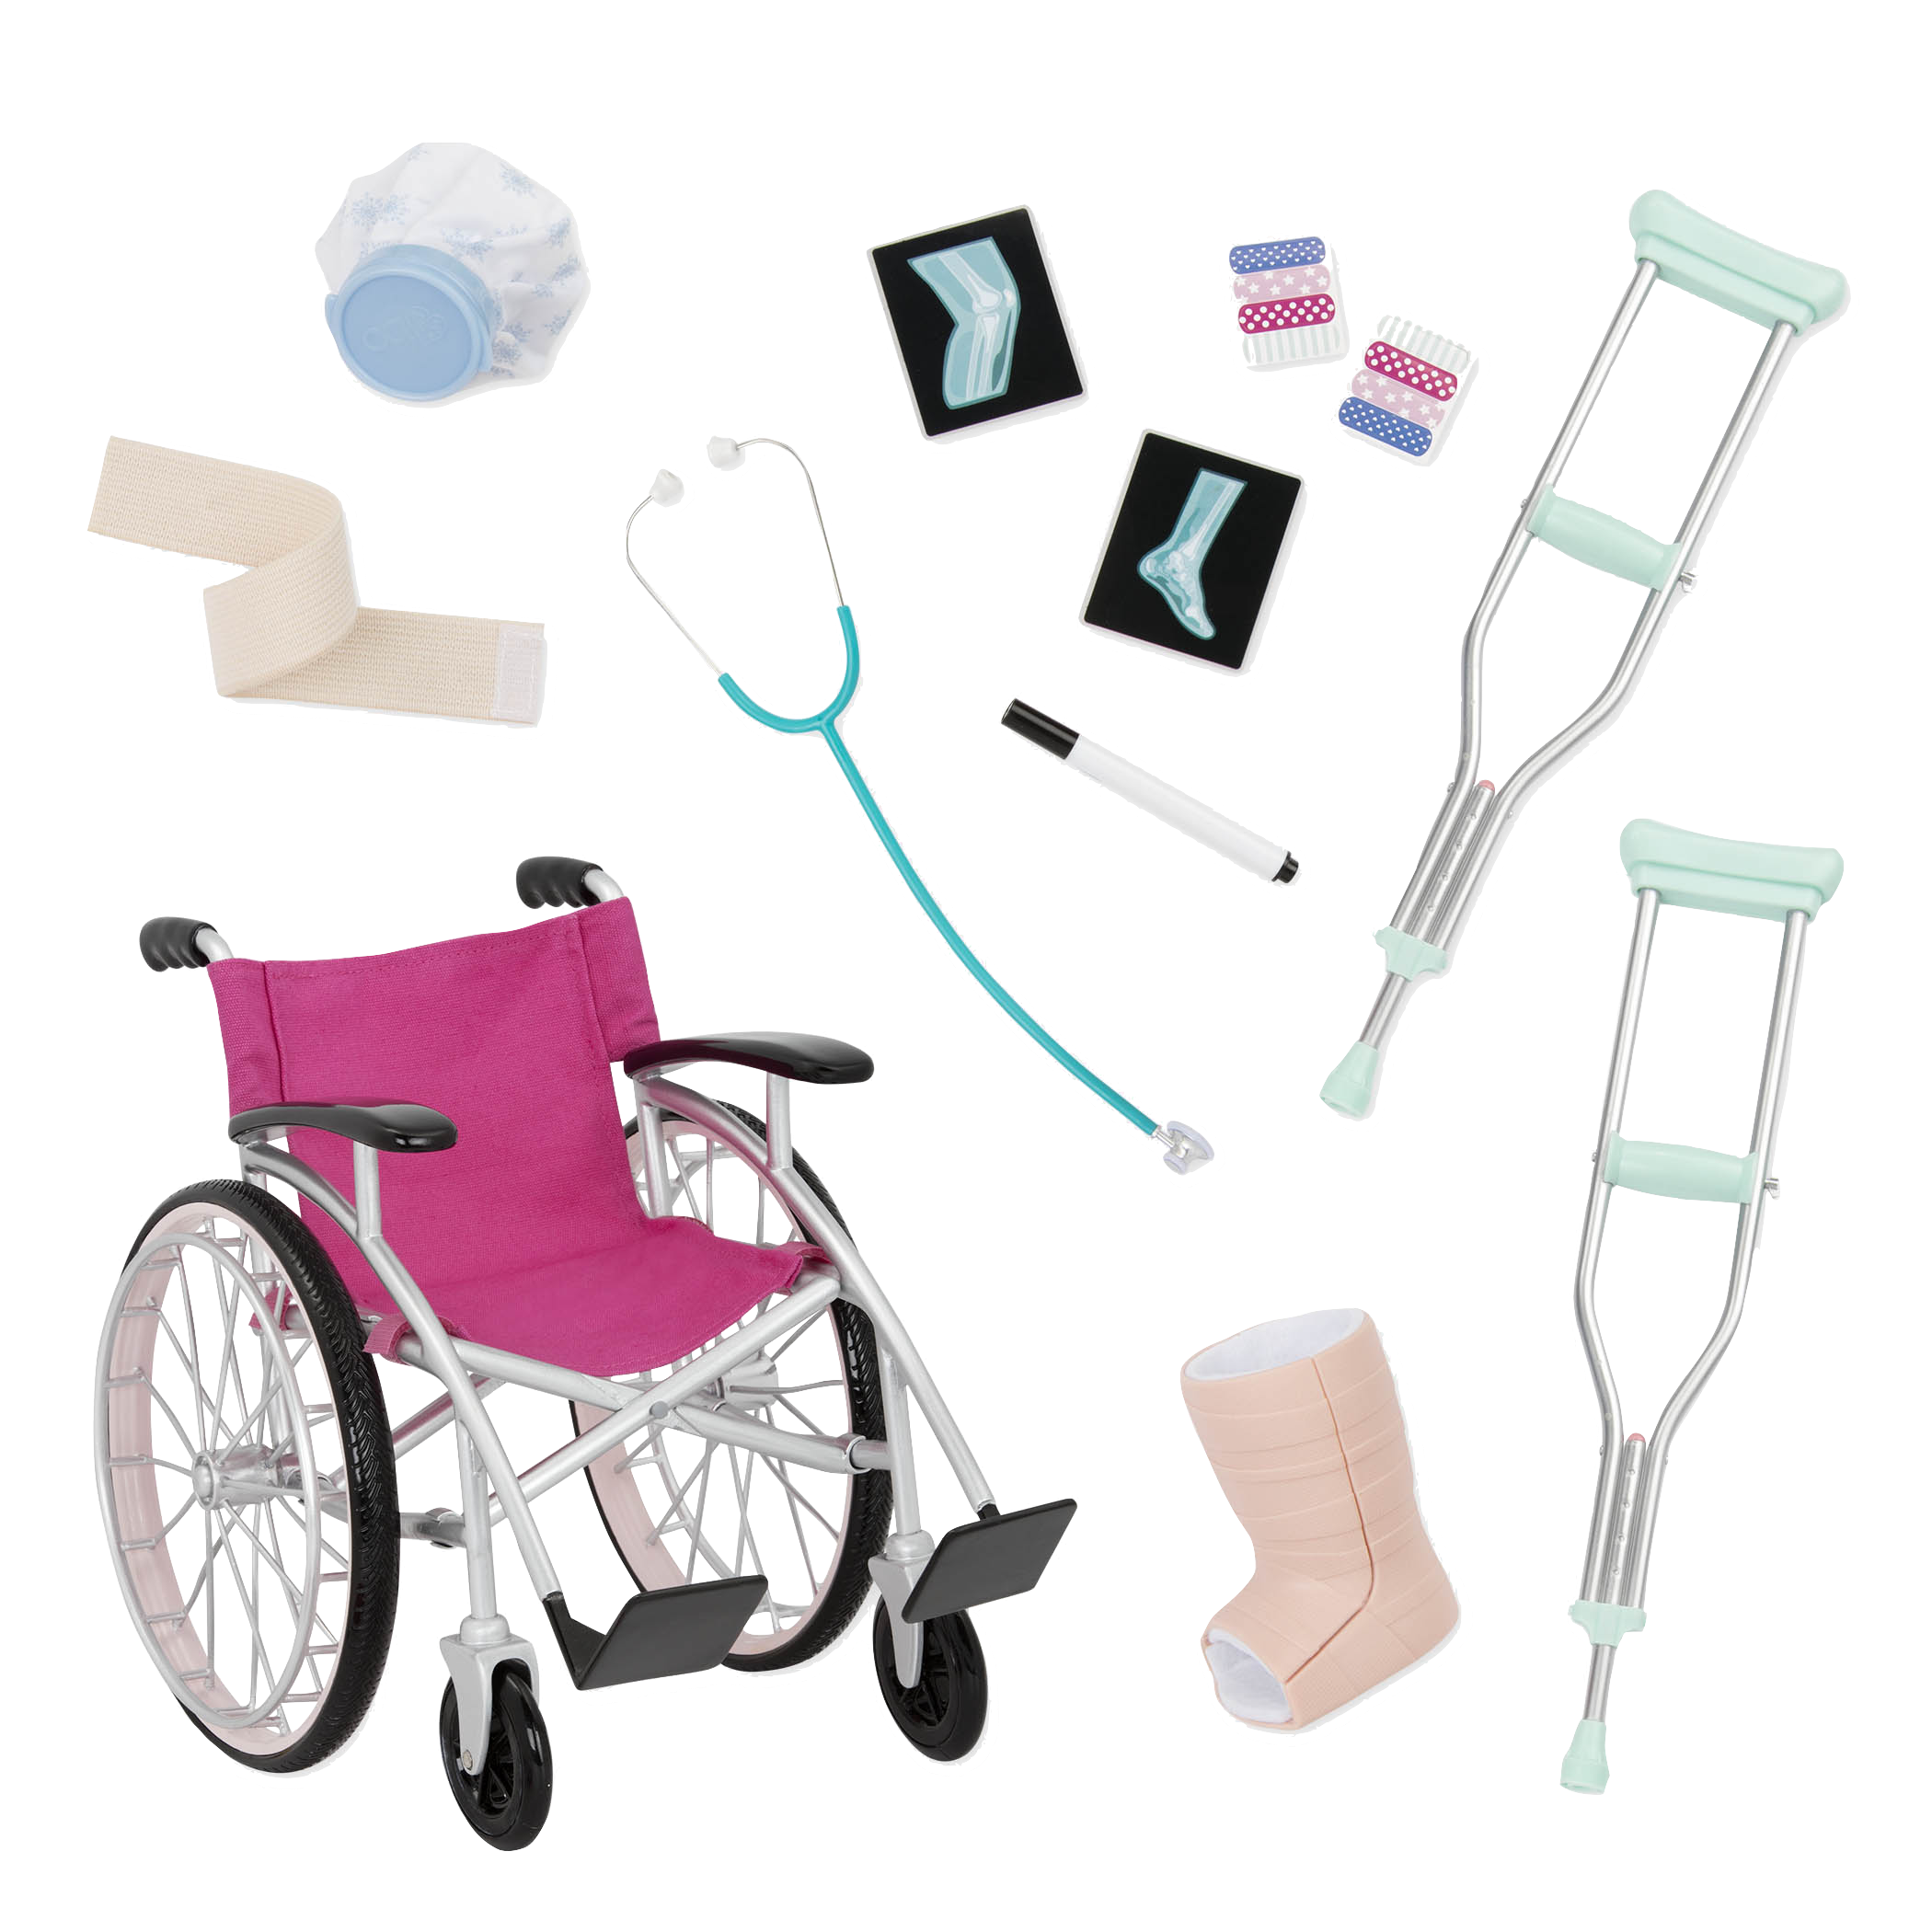 Heals on Wheels medical Accessories all components 